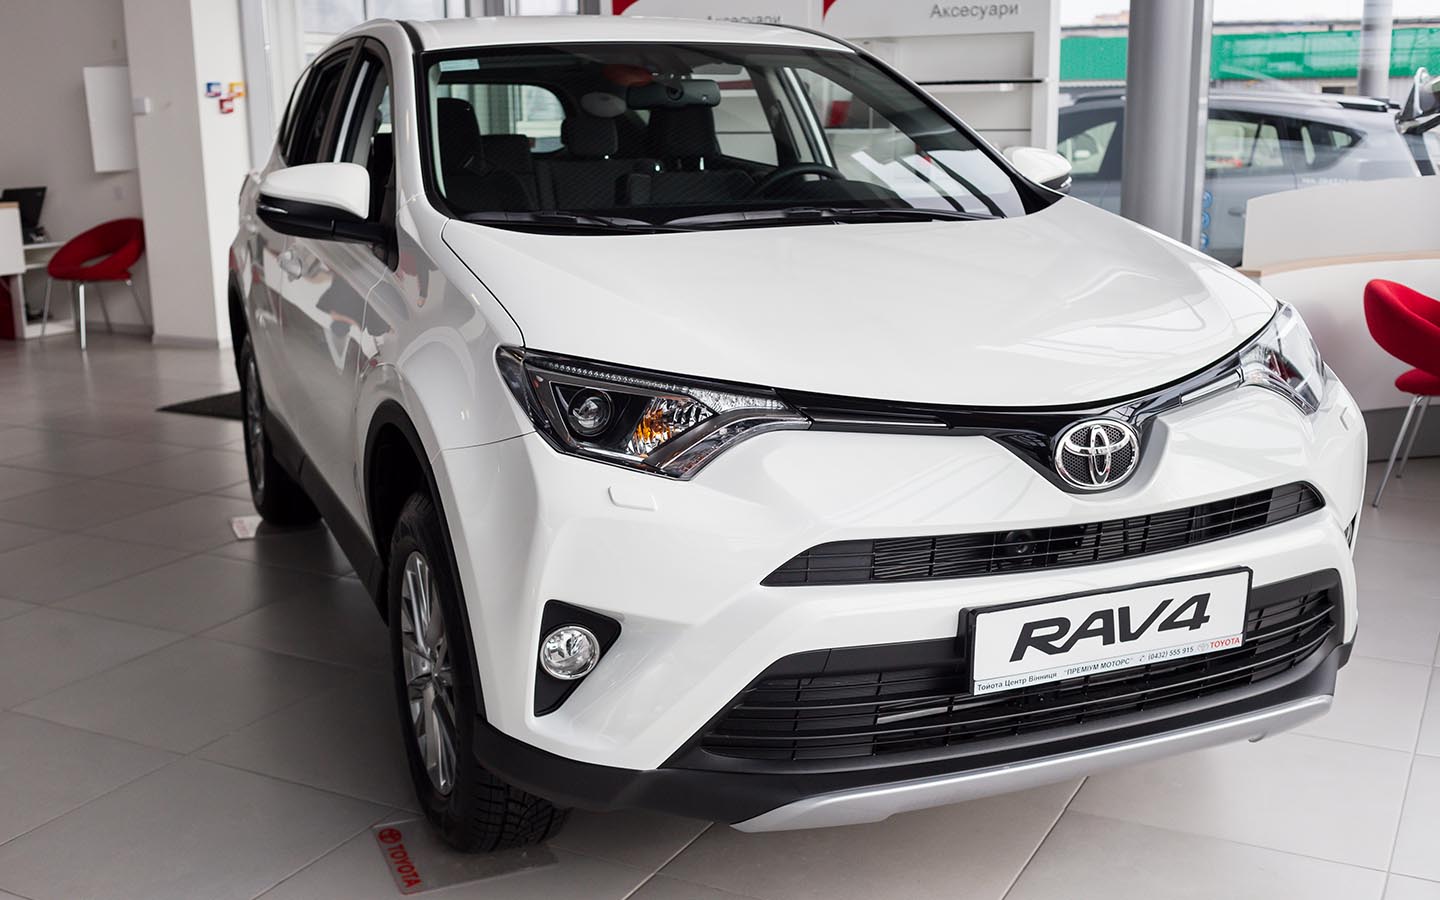 toyota rav 4 is available in different trim levels